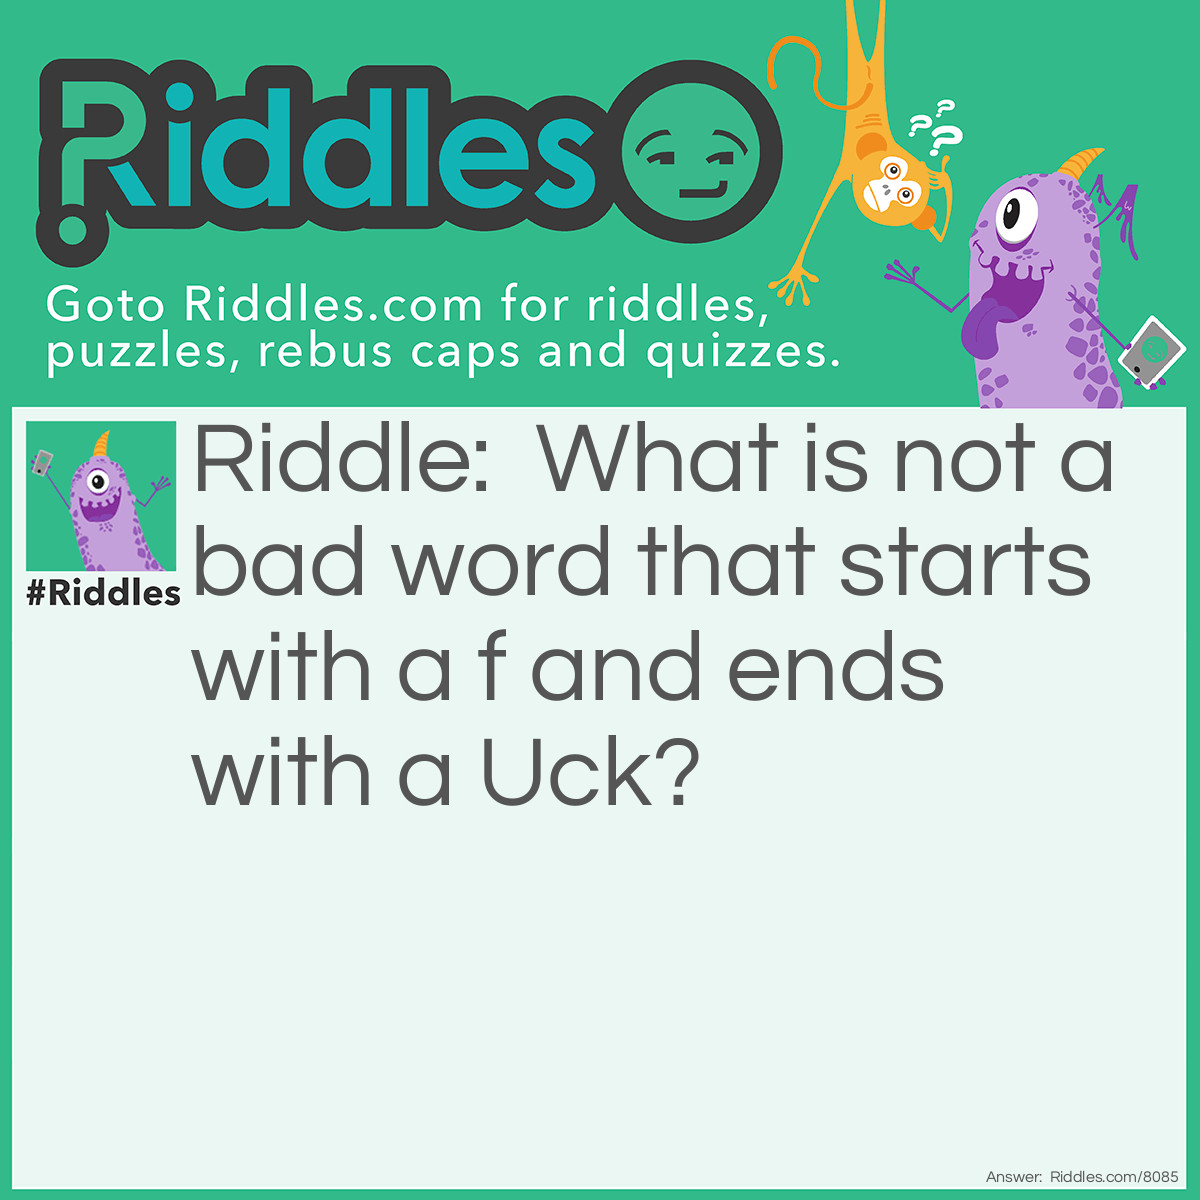 Riddle: What is not a bad word that starts with a f and ends with a Uck? Answer: Firetruck.